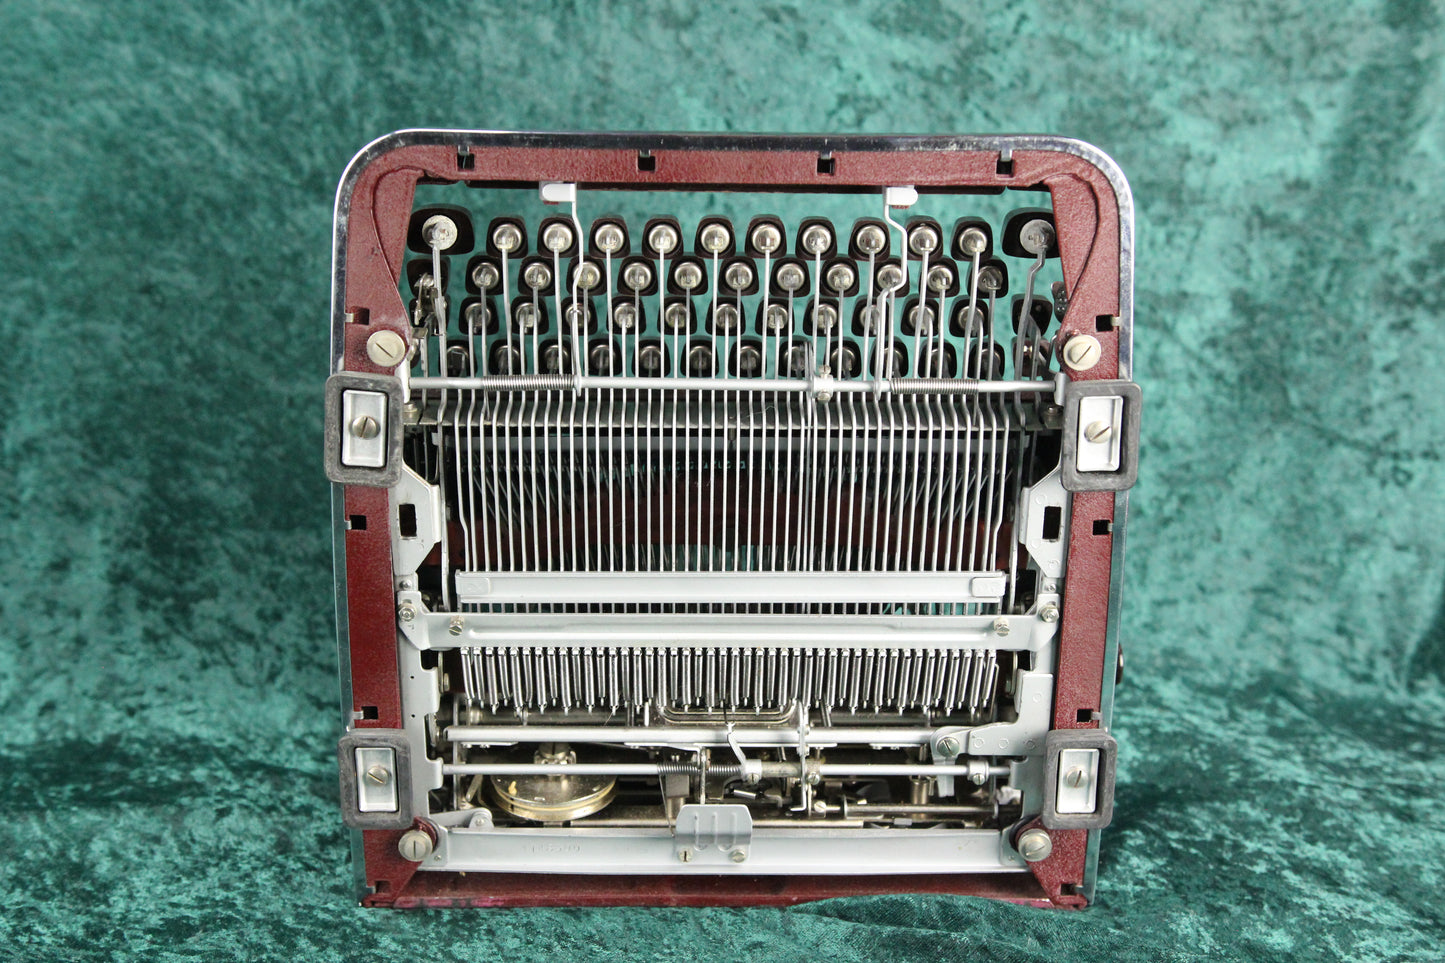 Olympia SM-4 DeLuxe Portable Manual Typewriter, Maroon Color, 1958